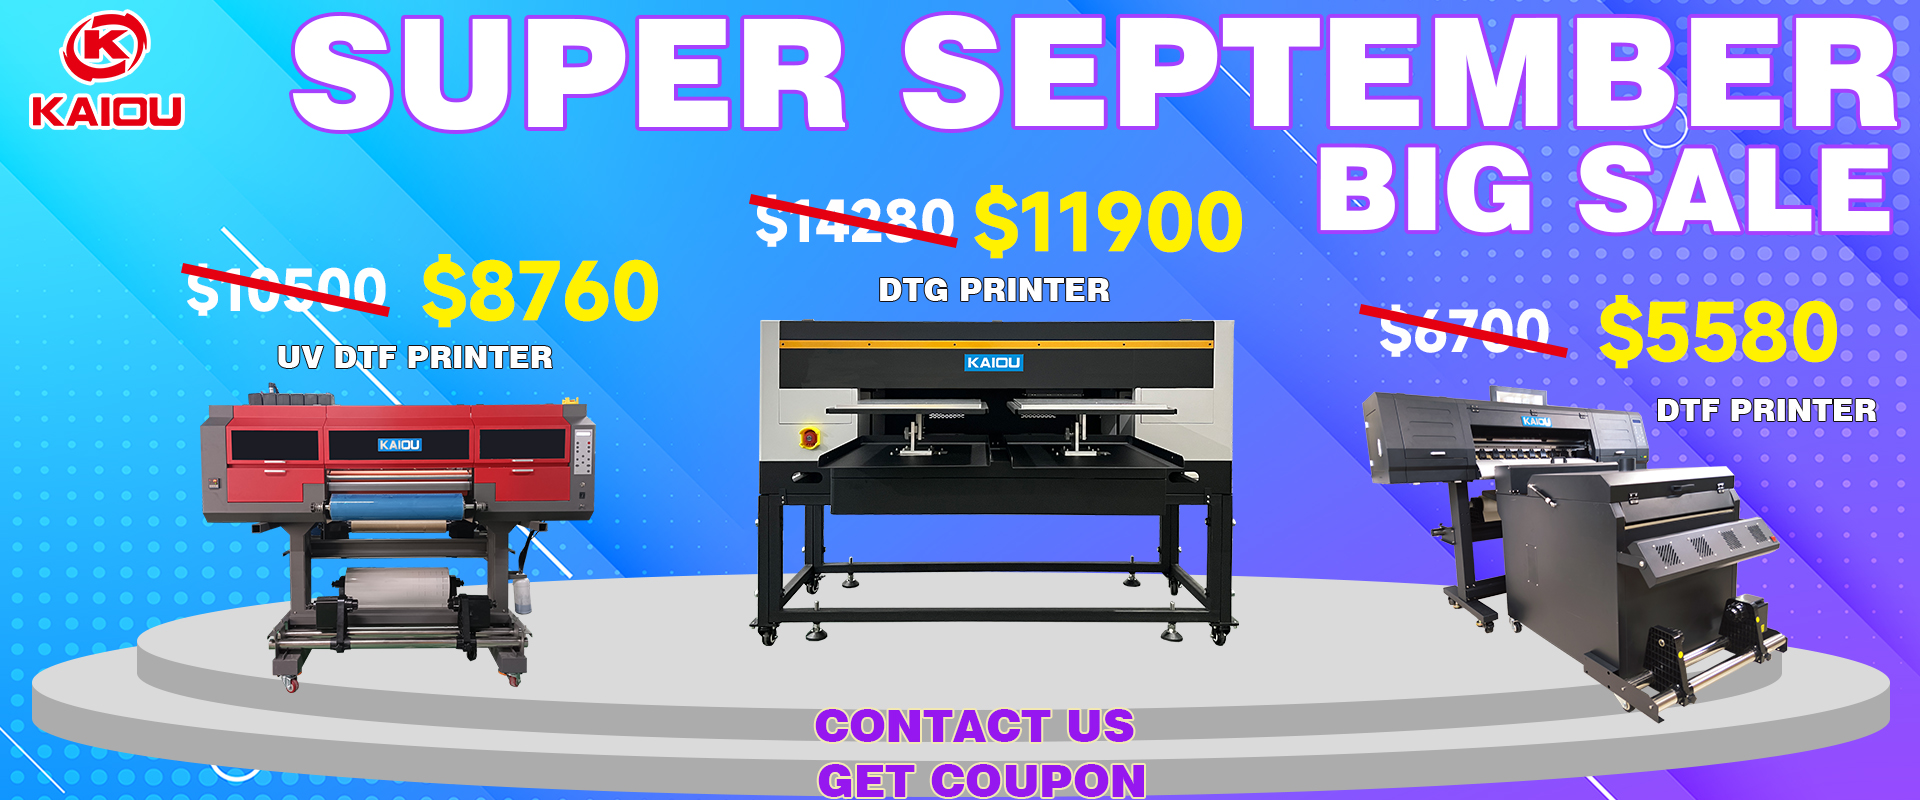 Precautions for Purchasing and Maintaining DTF Printers